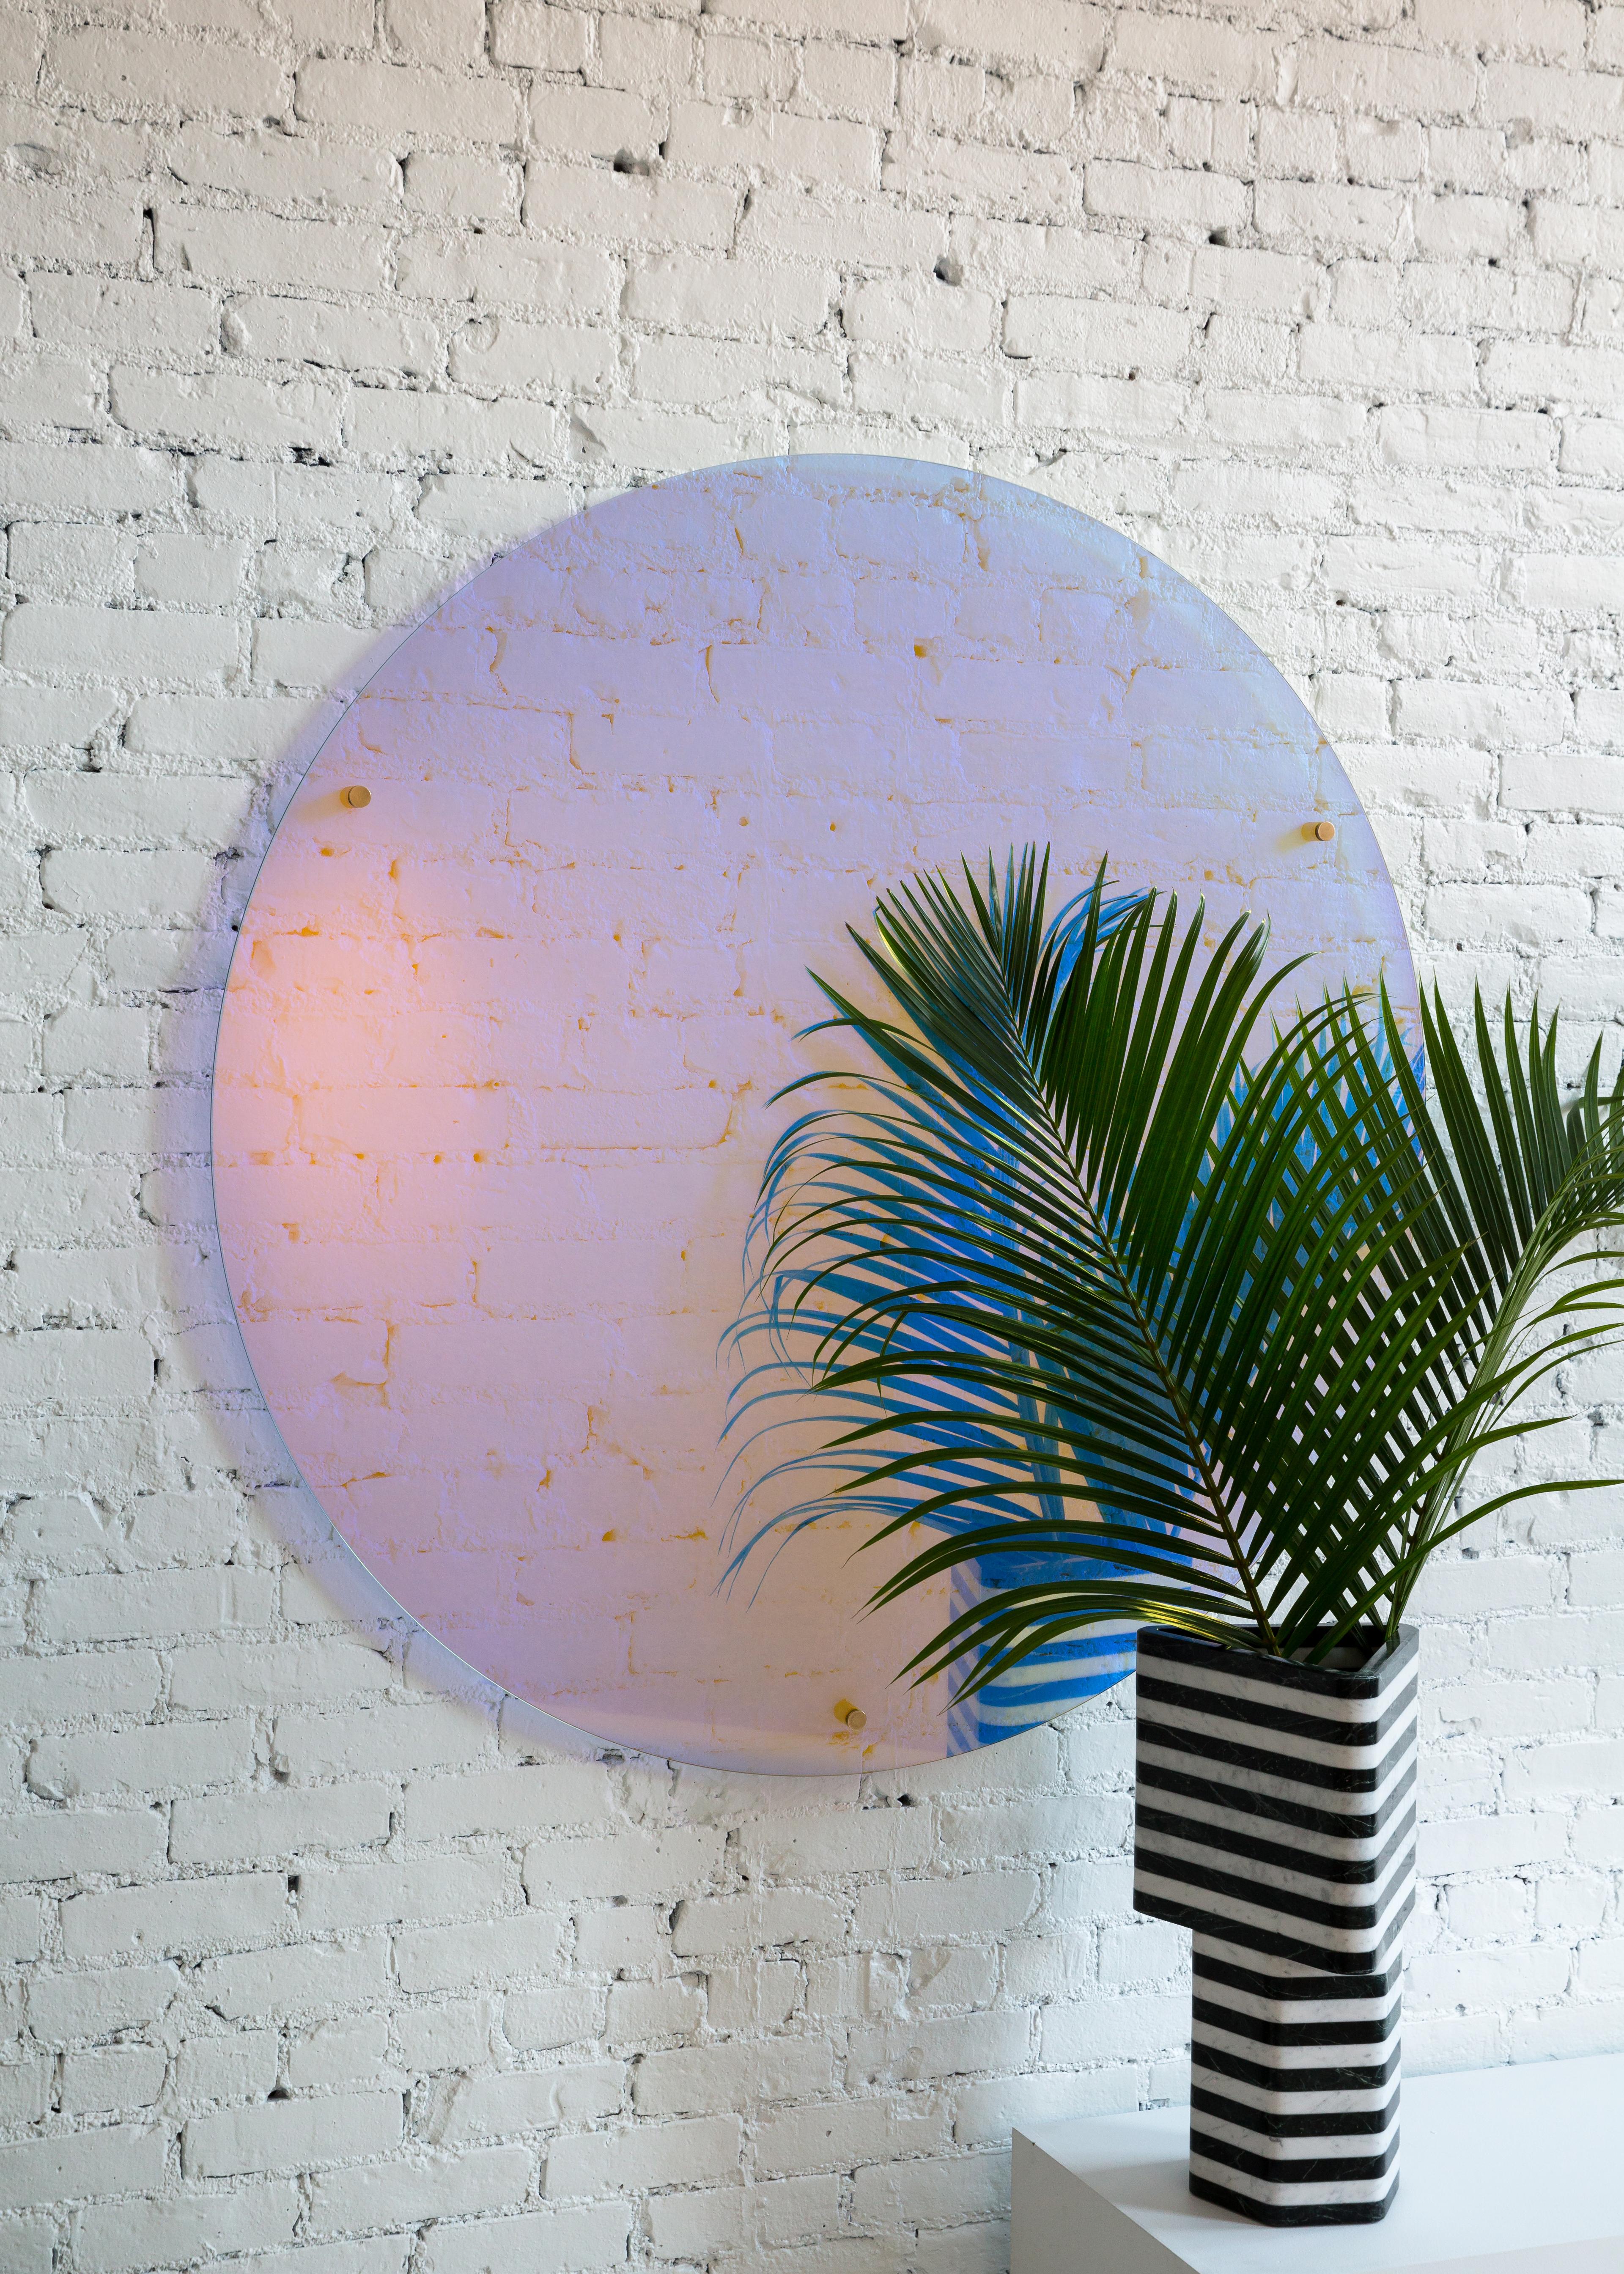 This unique wall mounted piece is as much a statement art piece as it is a mirror. Made of the highest quality dichroic glass the color shifts when viewing from different angles and throughout the day as changes in natural light intensity and color